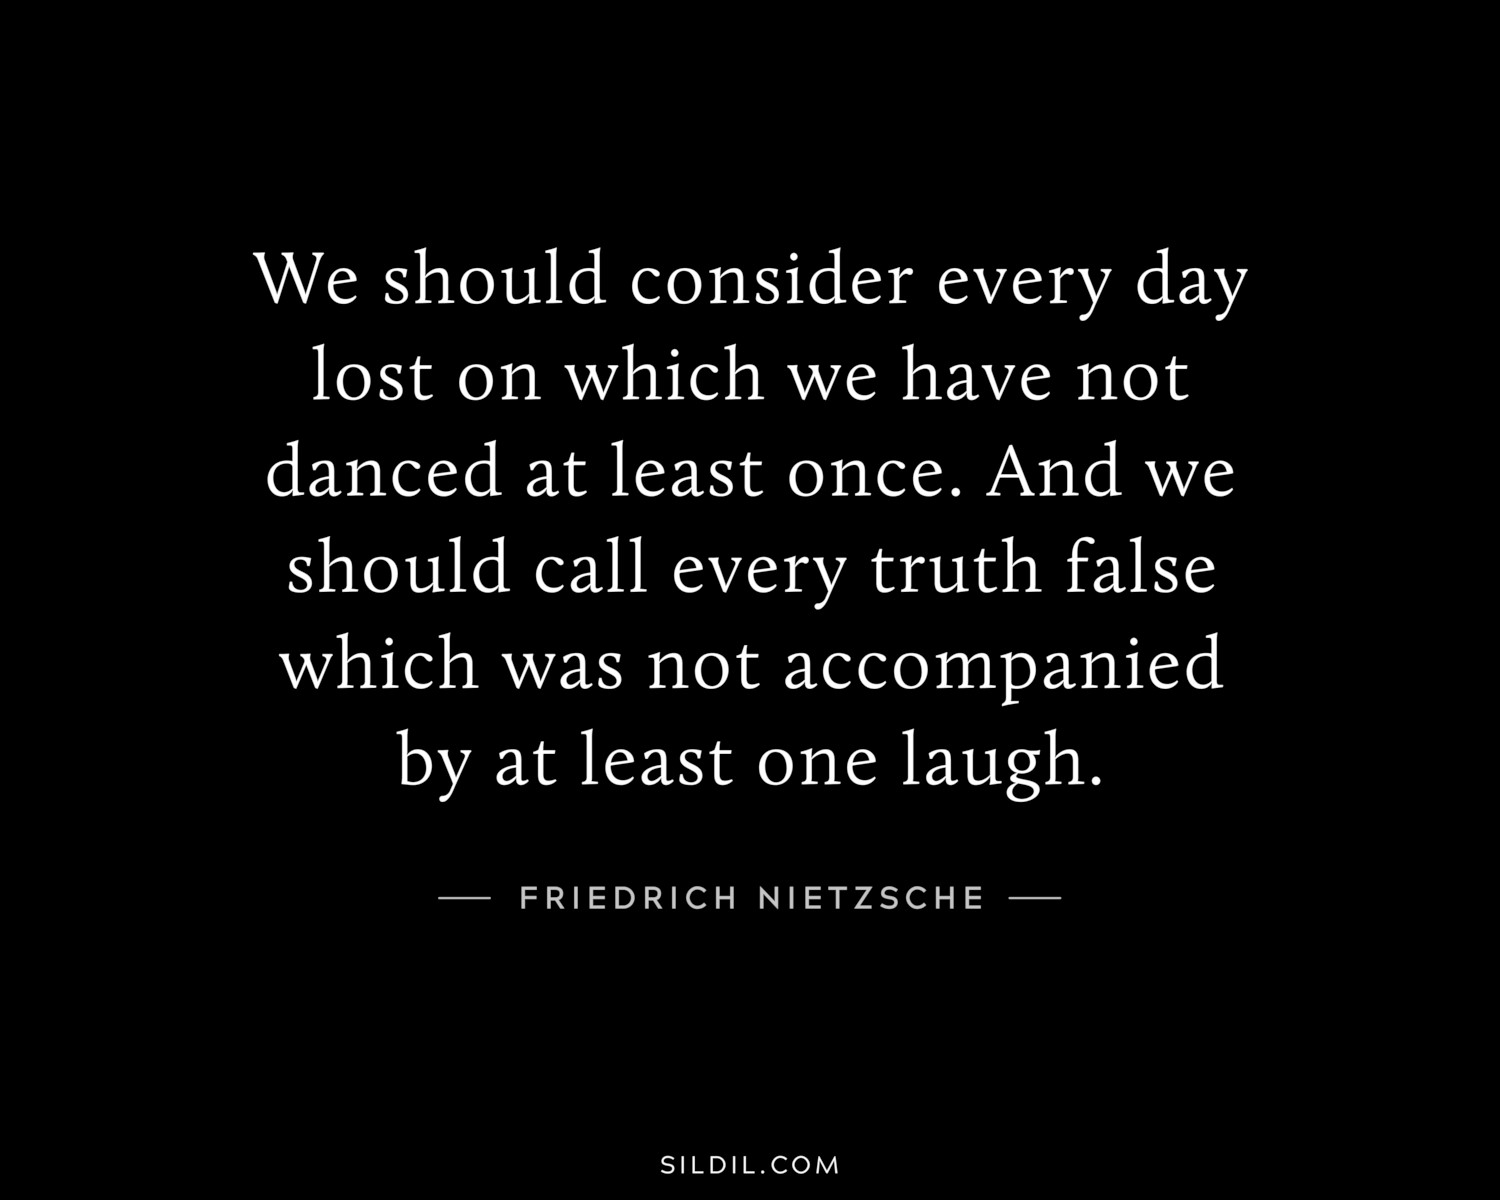 We should consider every day lost on which we have not danced at least once. And we should call every truth false which was not accompanied by at least one laugh.